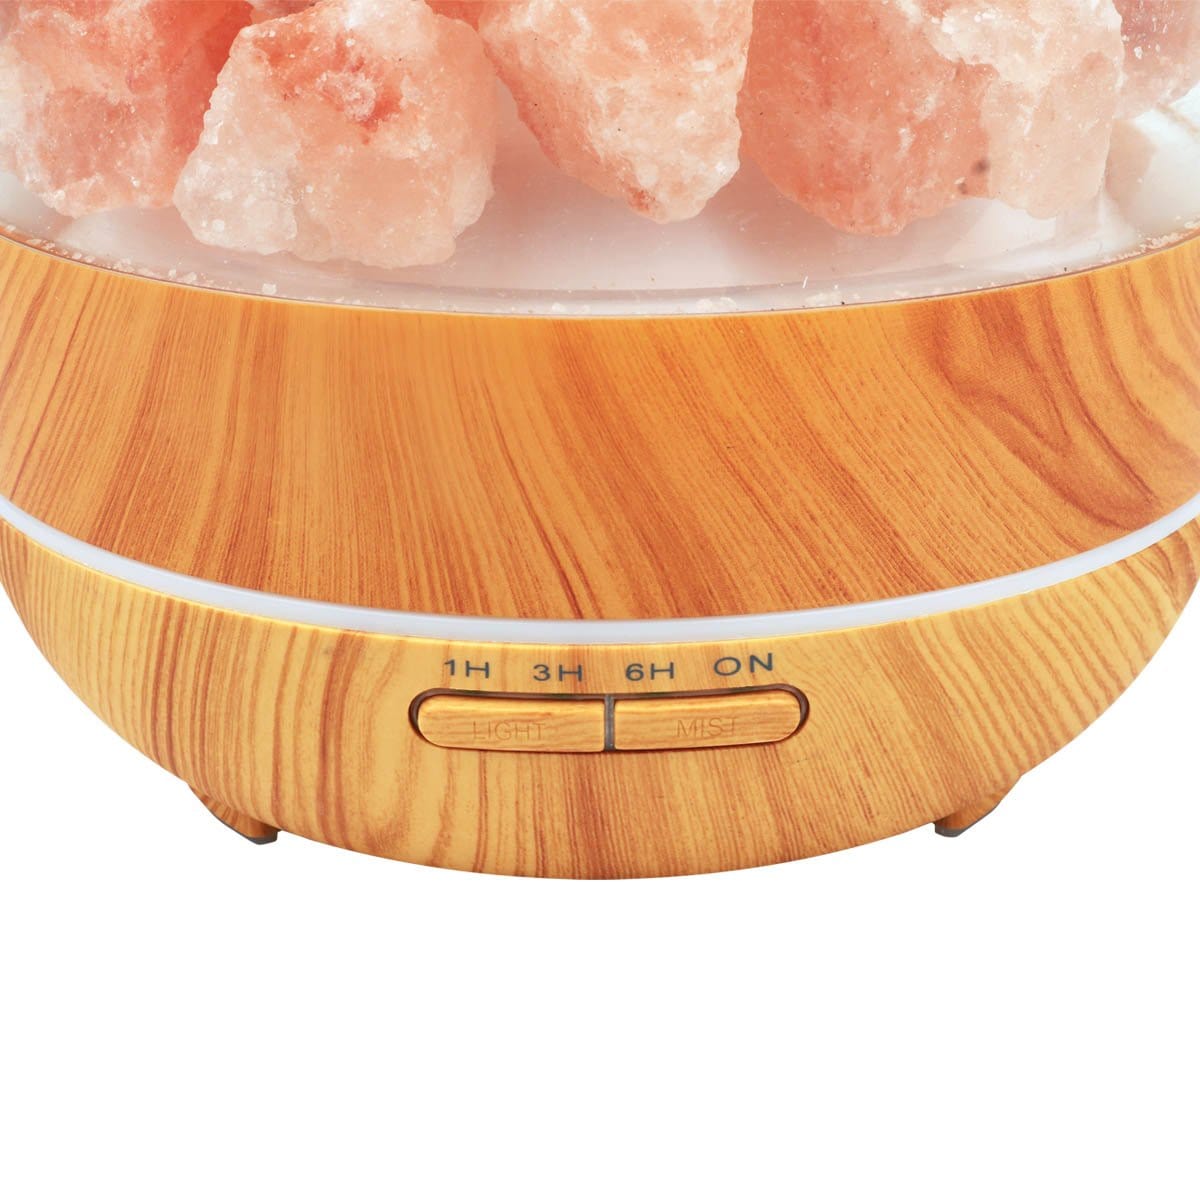 Salt of the Earth Essential Oil Diffuser base